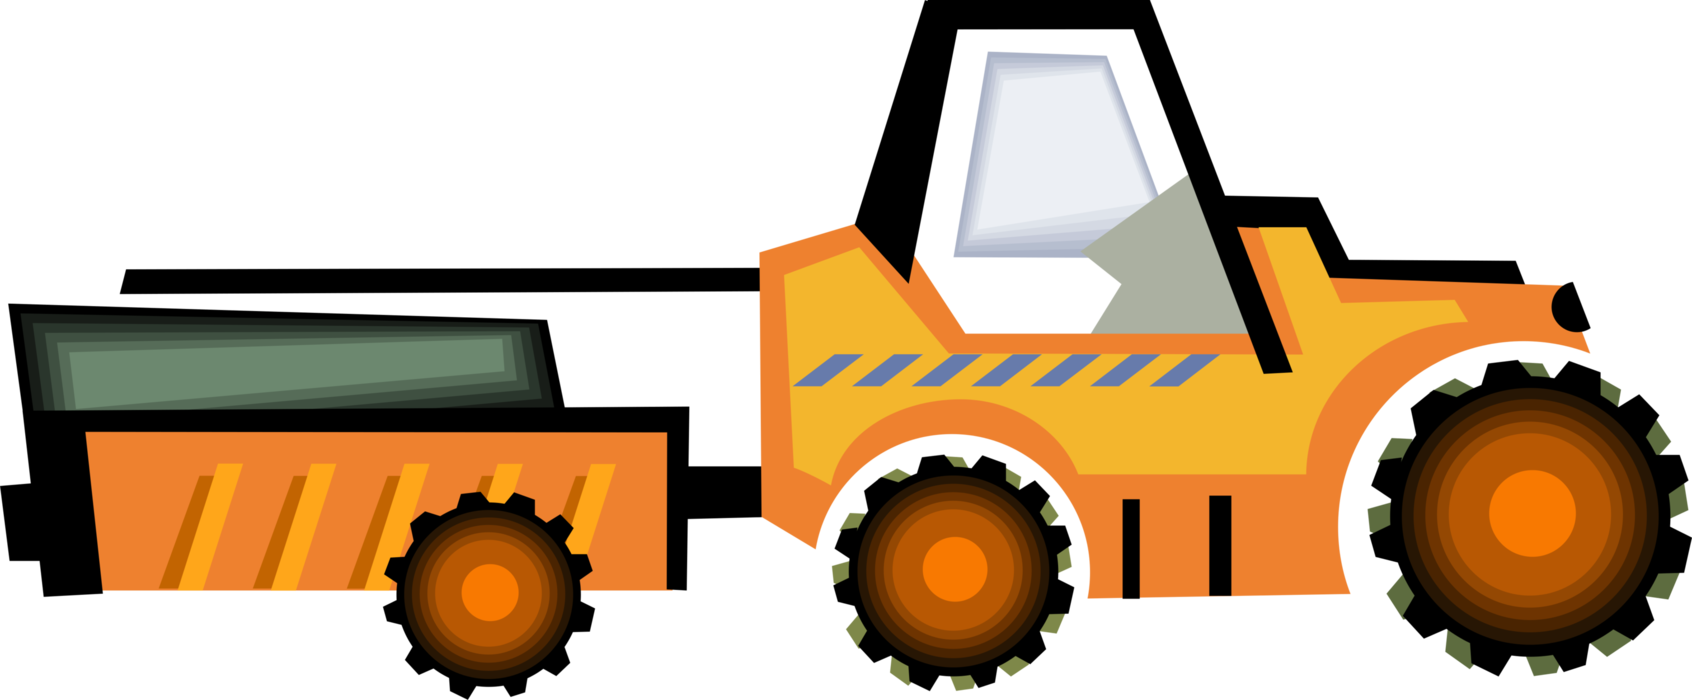 Vector Illustration of Farm Equipment Tractor with Farming Trailer